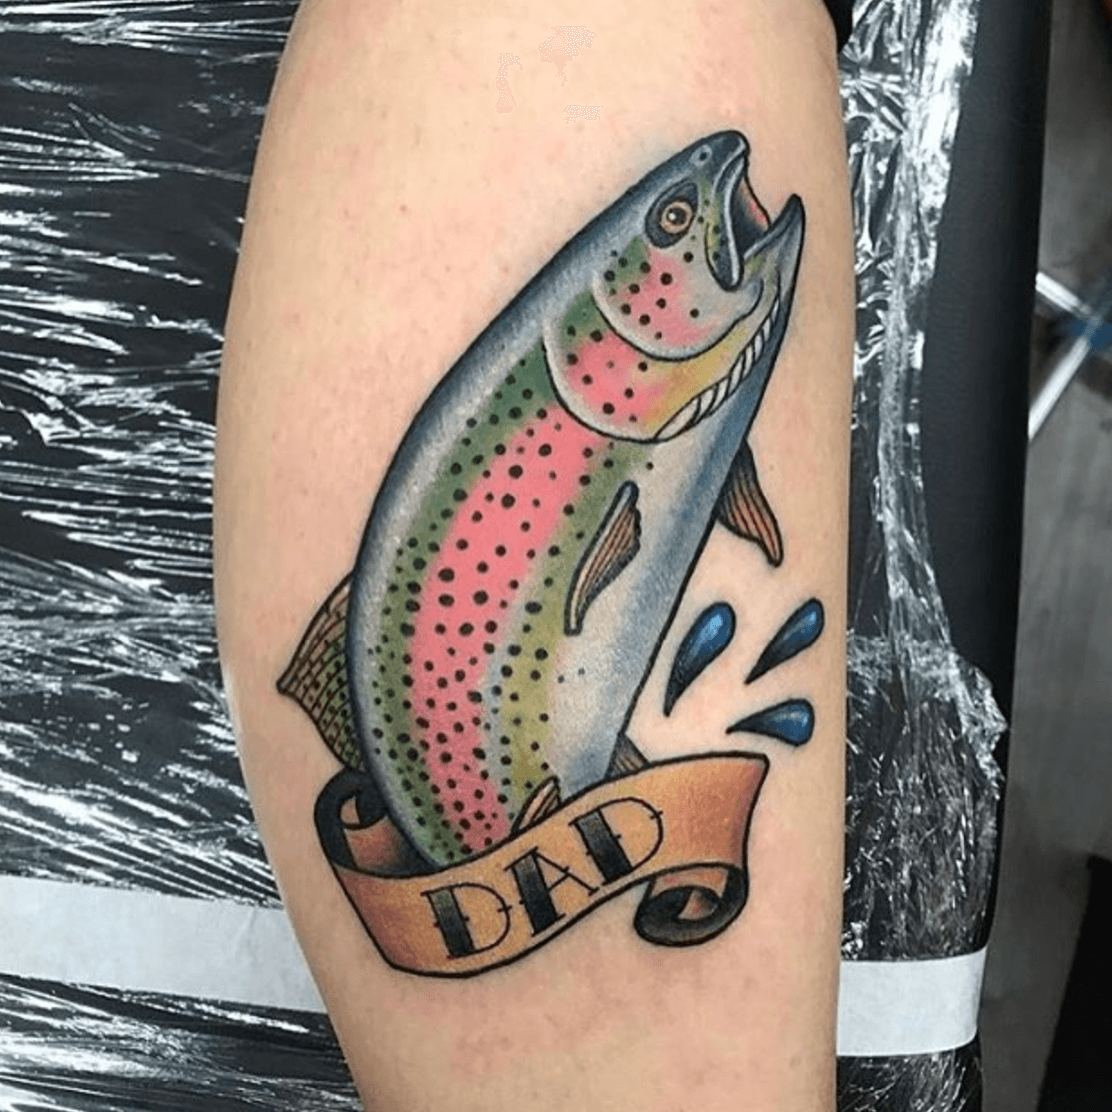 Rainbow Trout by Danny Reed at Hot Stuff Tattoo Asheville NC  rtattoos